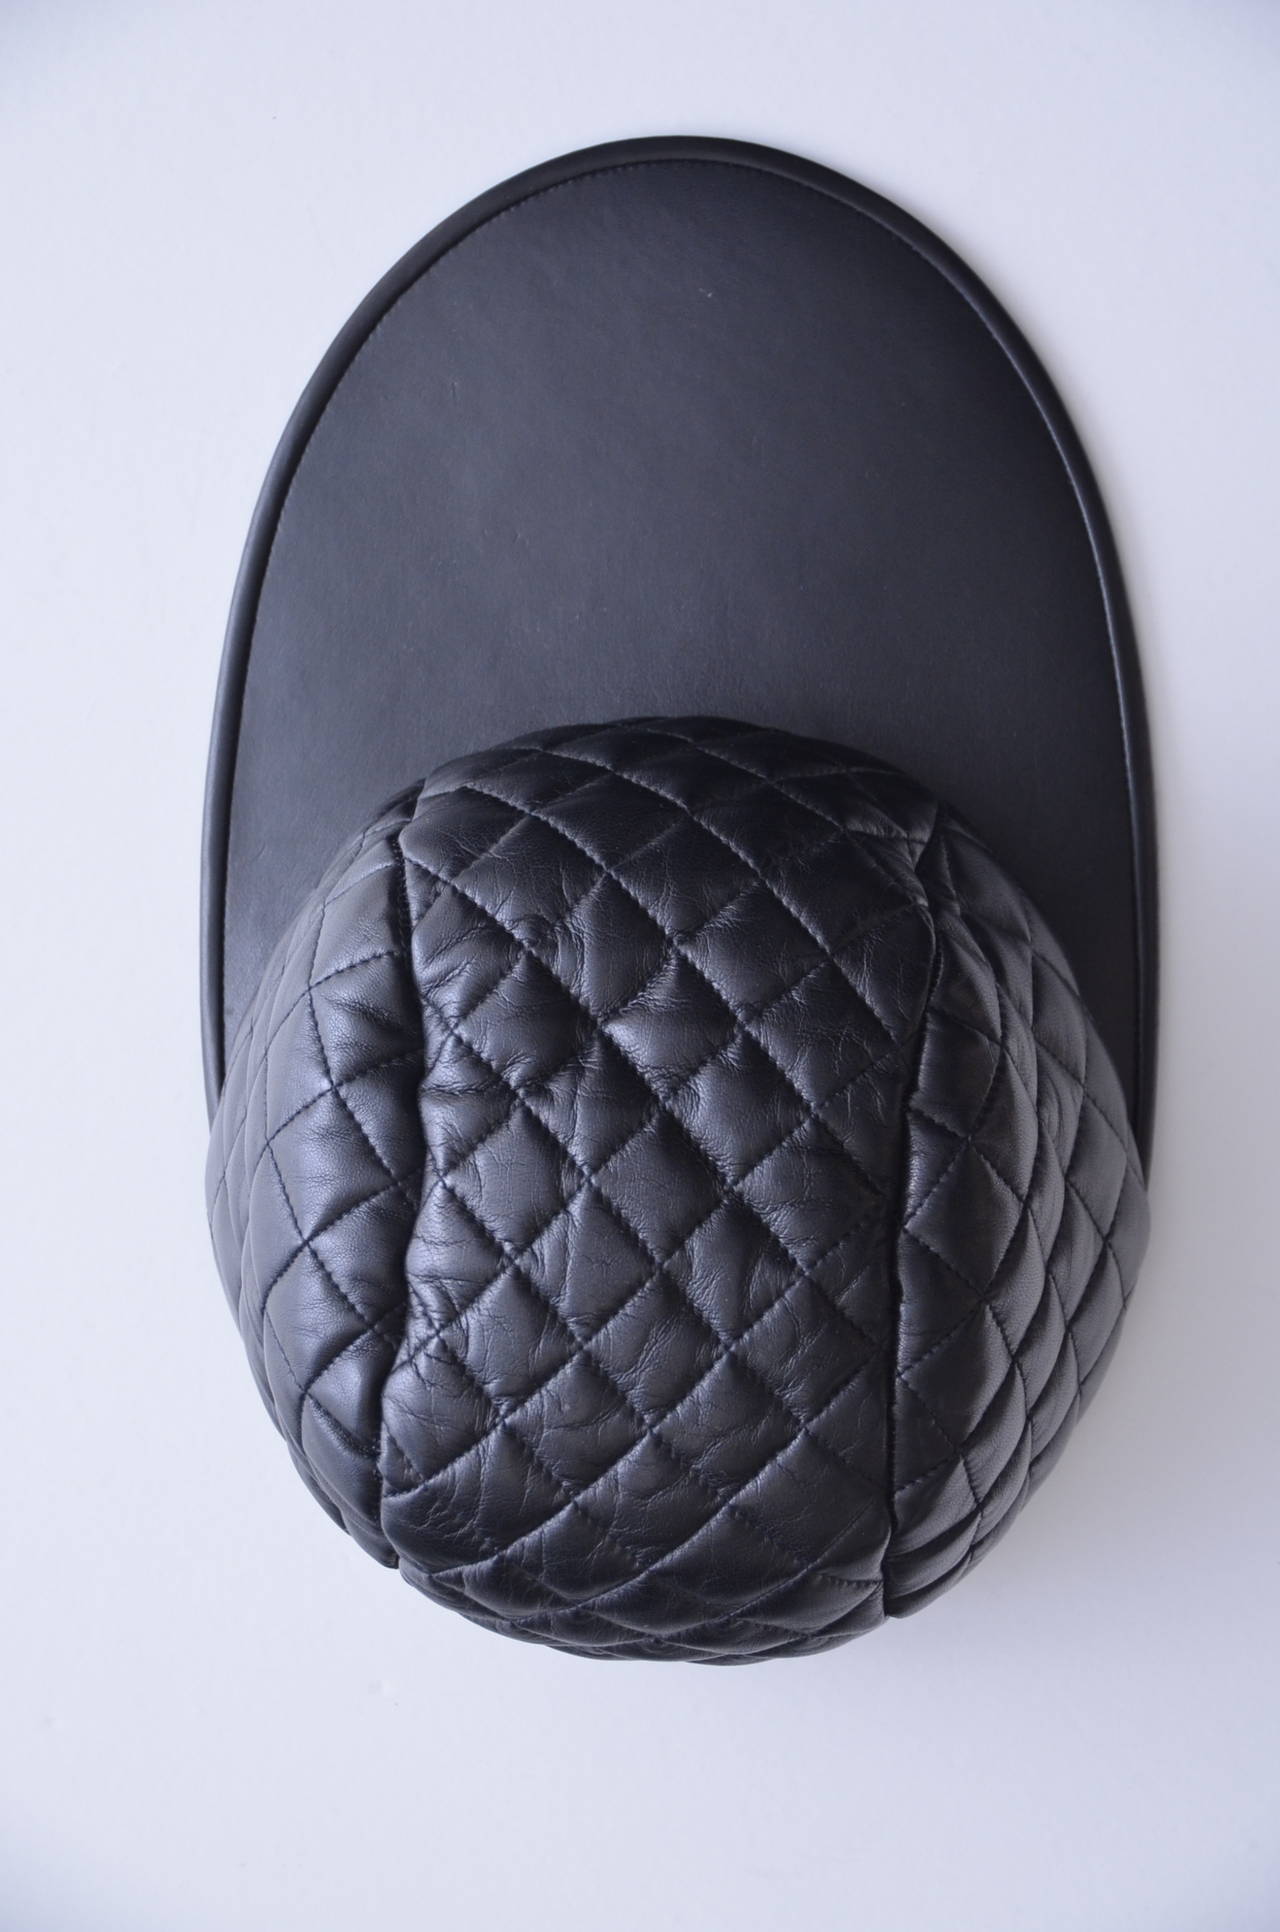 Chanel vintage lambskin leather  quilted hat.
New with tags.
Very unusual hat with super  long front .

As seen on Linda Evangelista and Karl Lagerfeld's Hip-Hop-Inspired Fall 1991 Chanel Show.

Size 56 (marked small on the paper tag) but its